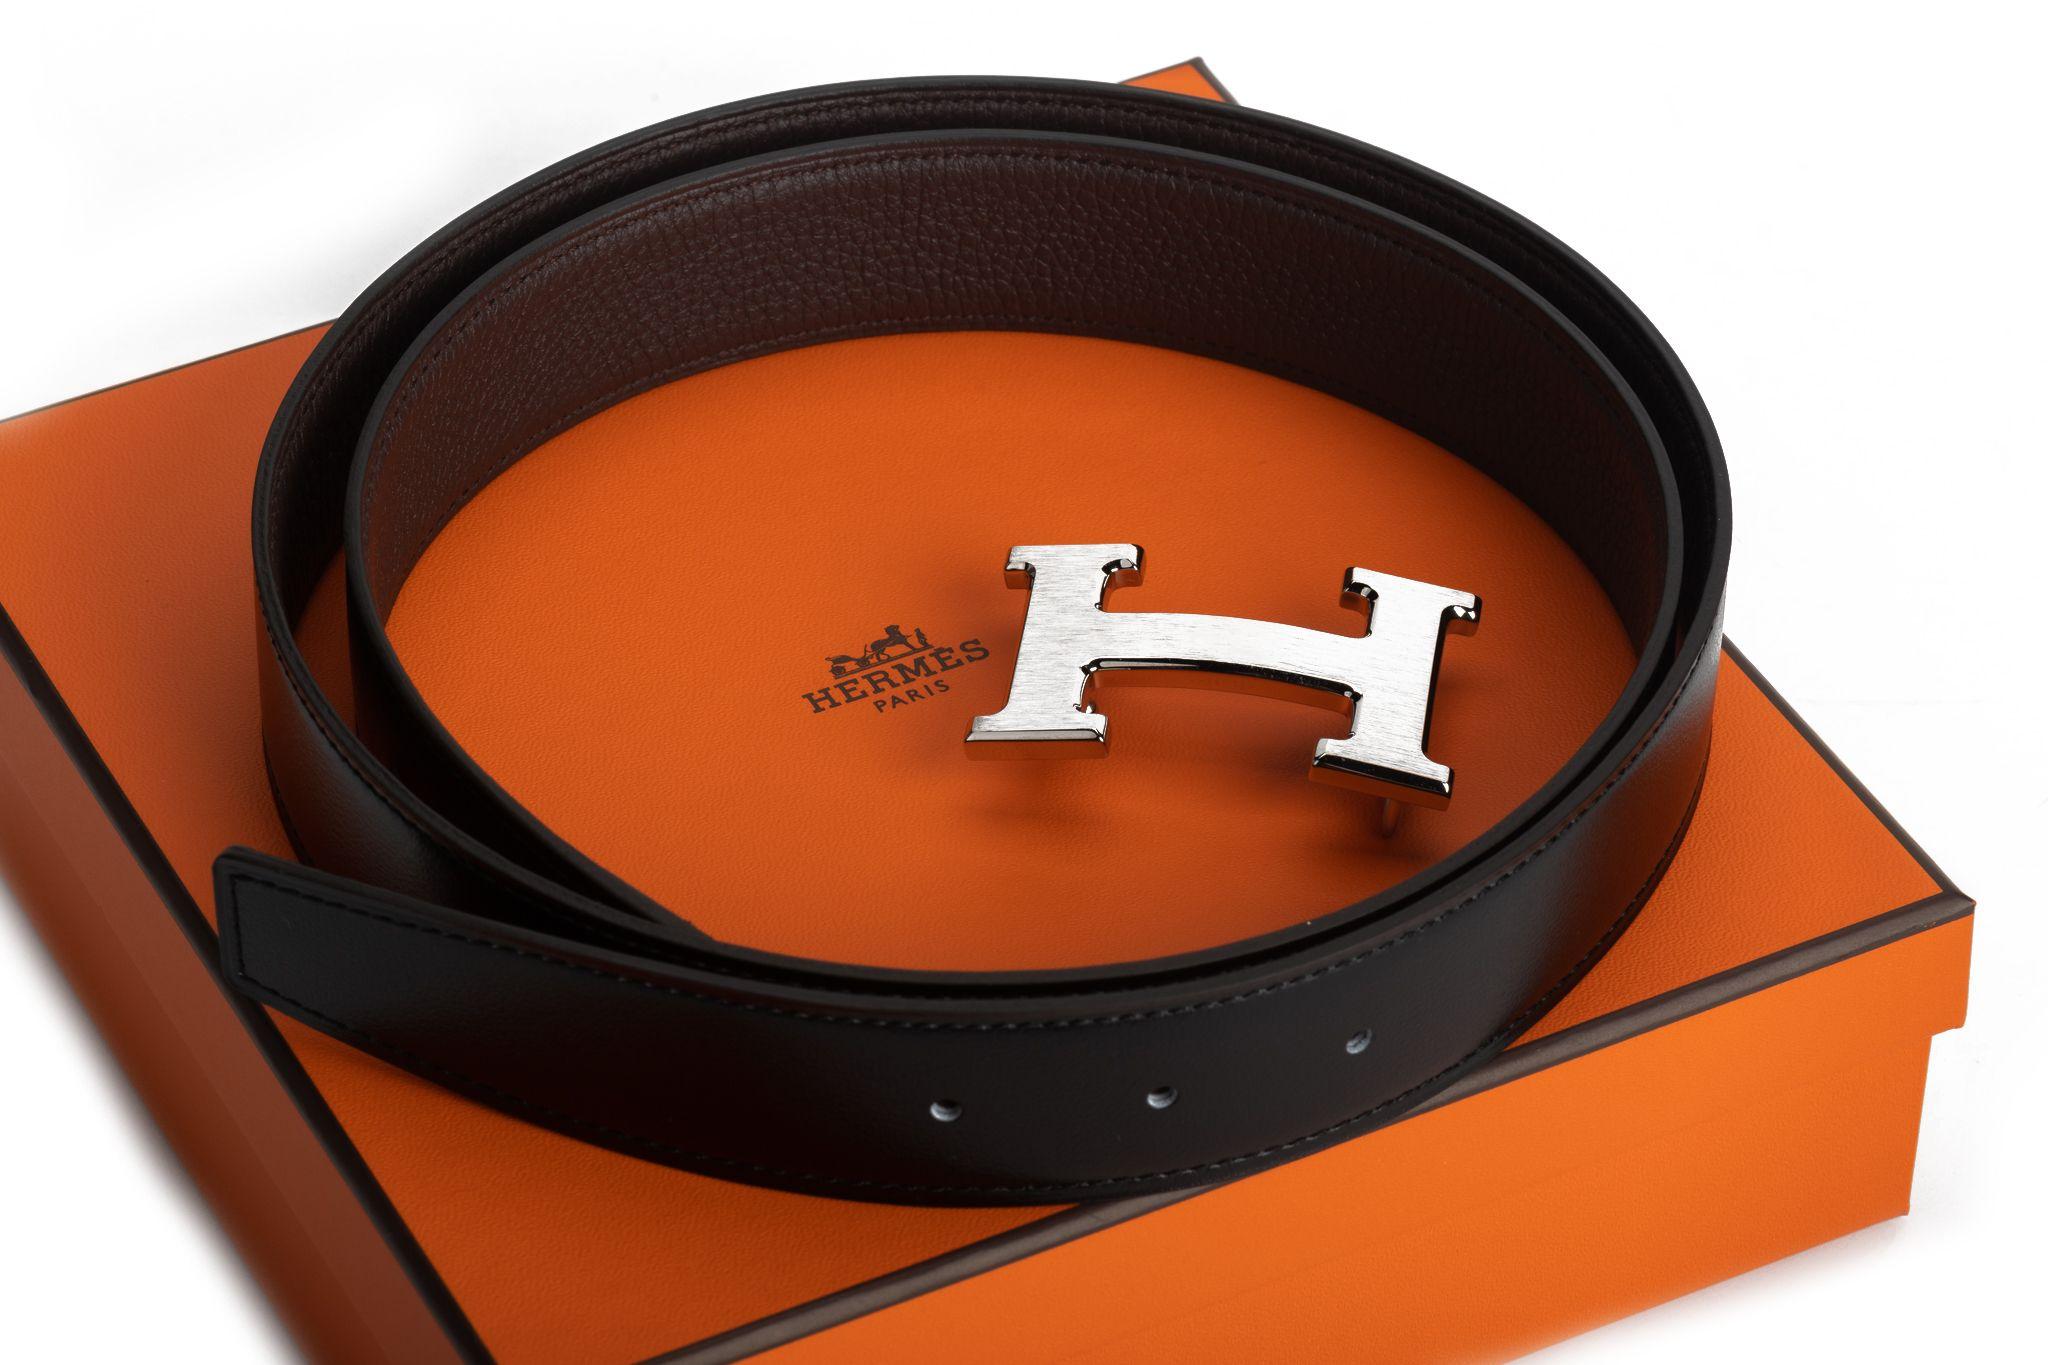 Hermèsbrand new black and brown reversible H belt. Palladium buckle, 95 cm long. Date stamp Y. It comes with original dustcover and box.
